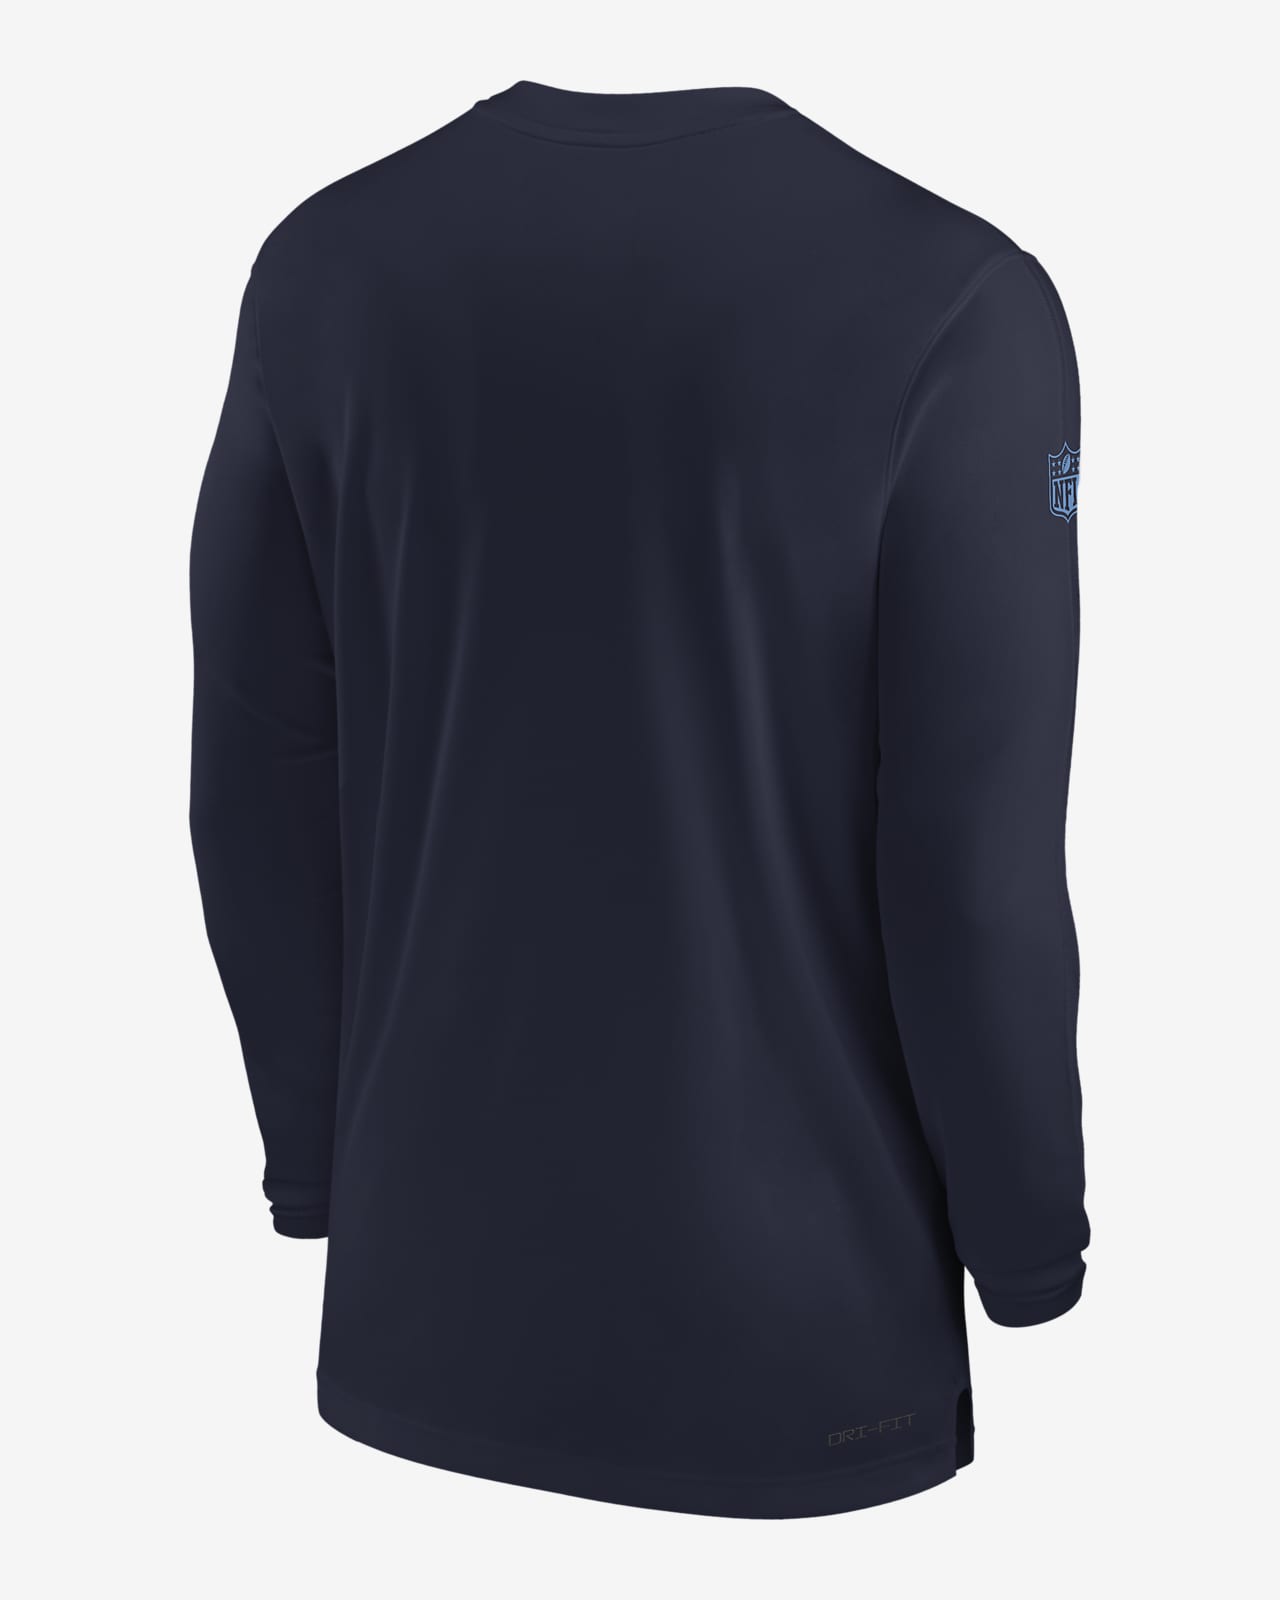 Nike Dri-FIT Sideline Coach (NFL Tennessee Titans) Men's Long-Sleeve Top